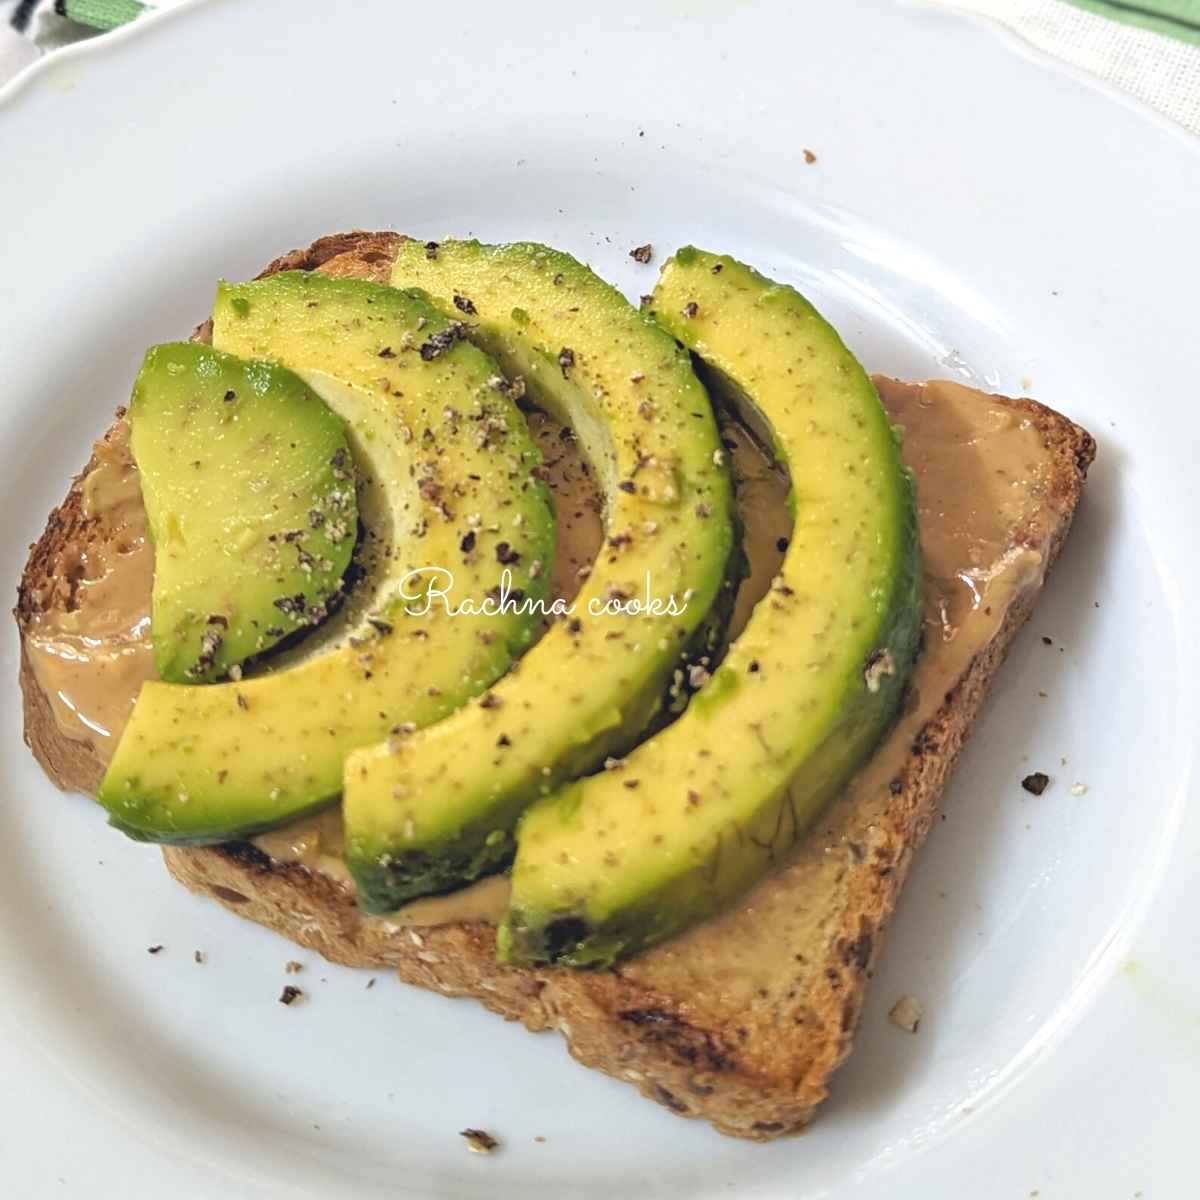 Peanut butter toast with avocado slices